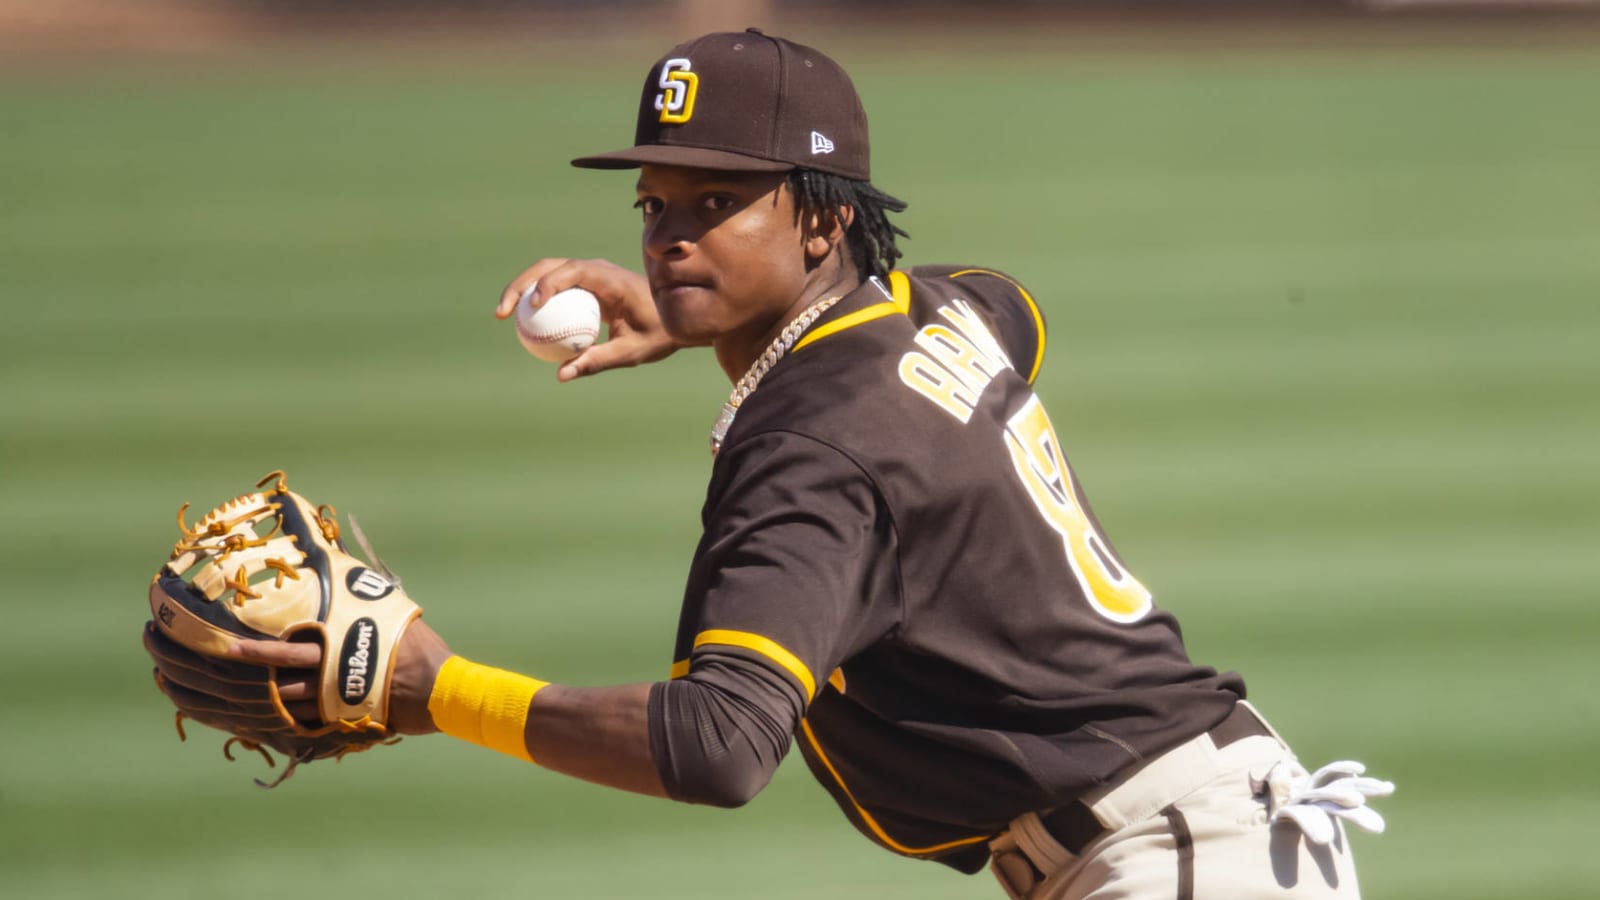 A Padres prospect on the move: Looking back and ahead on CJ Abrams